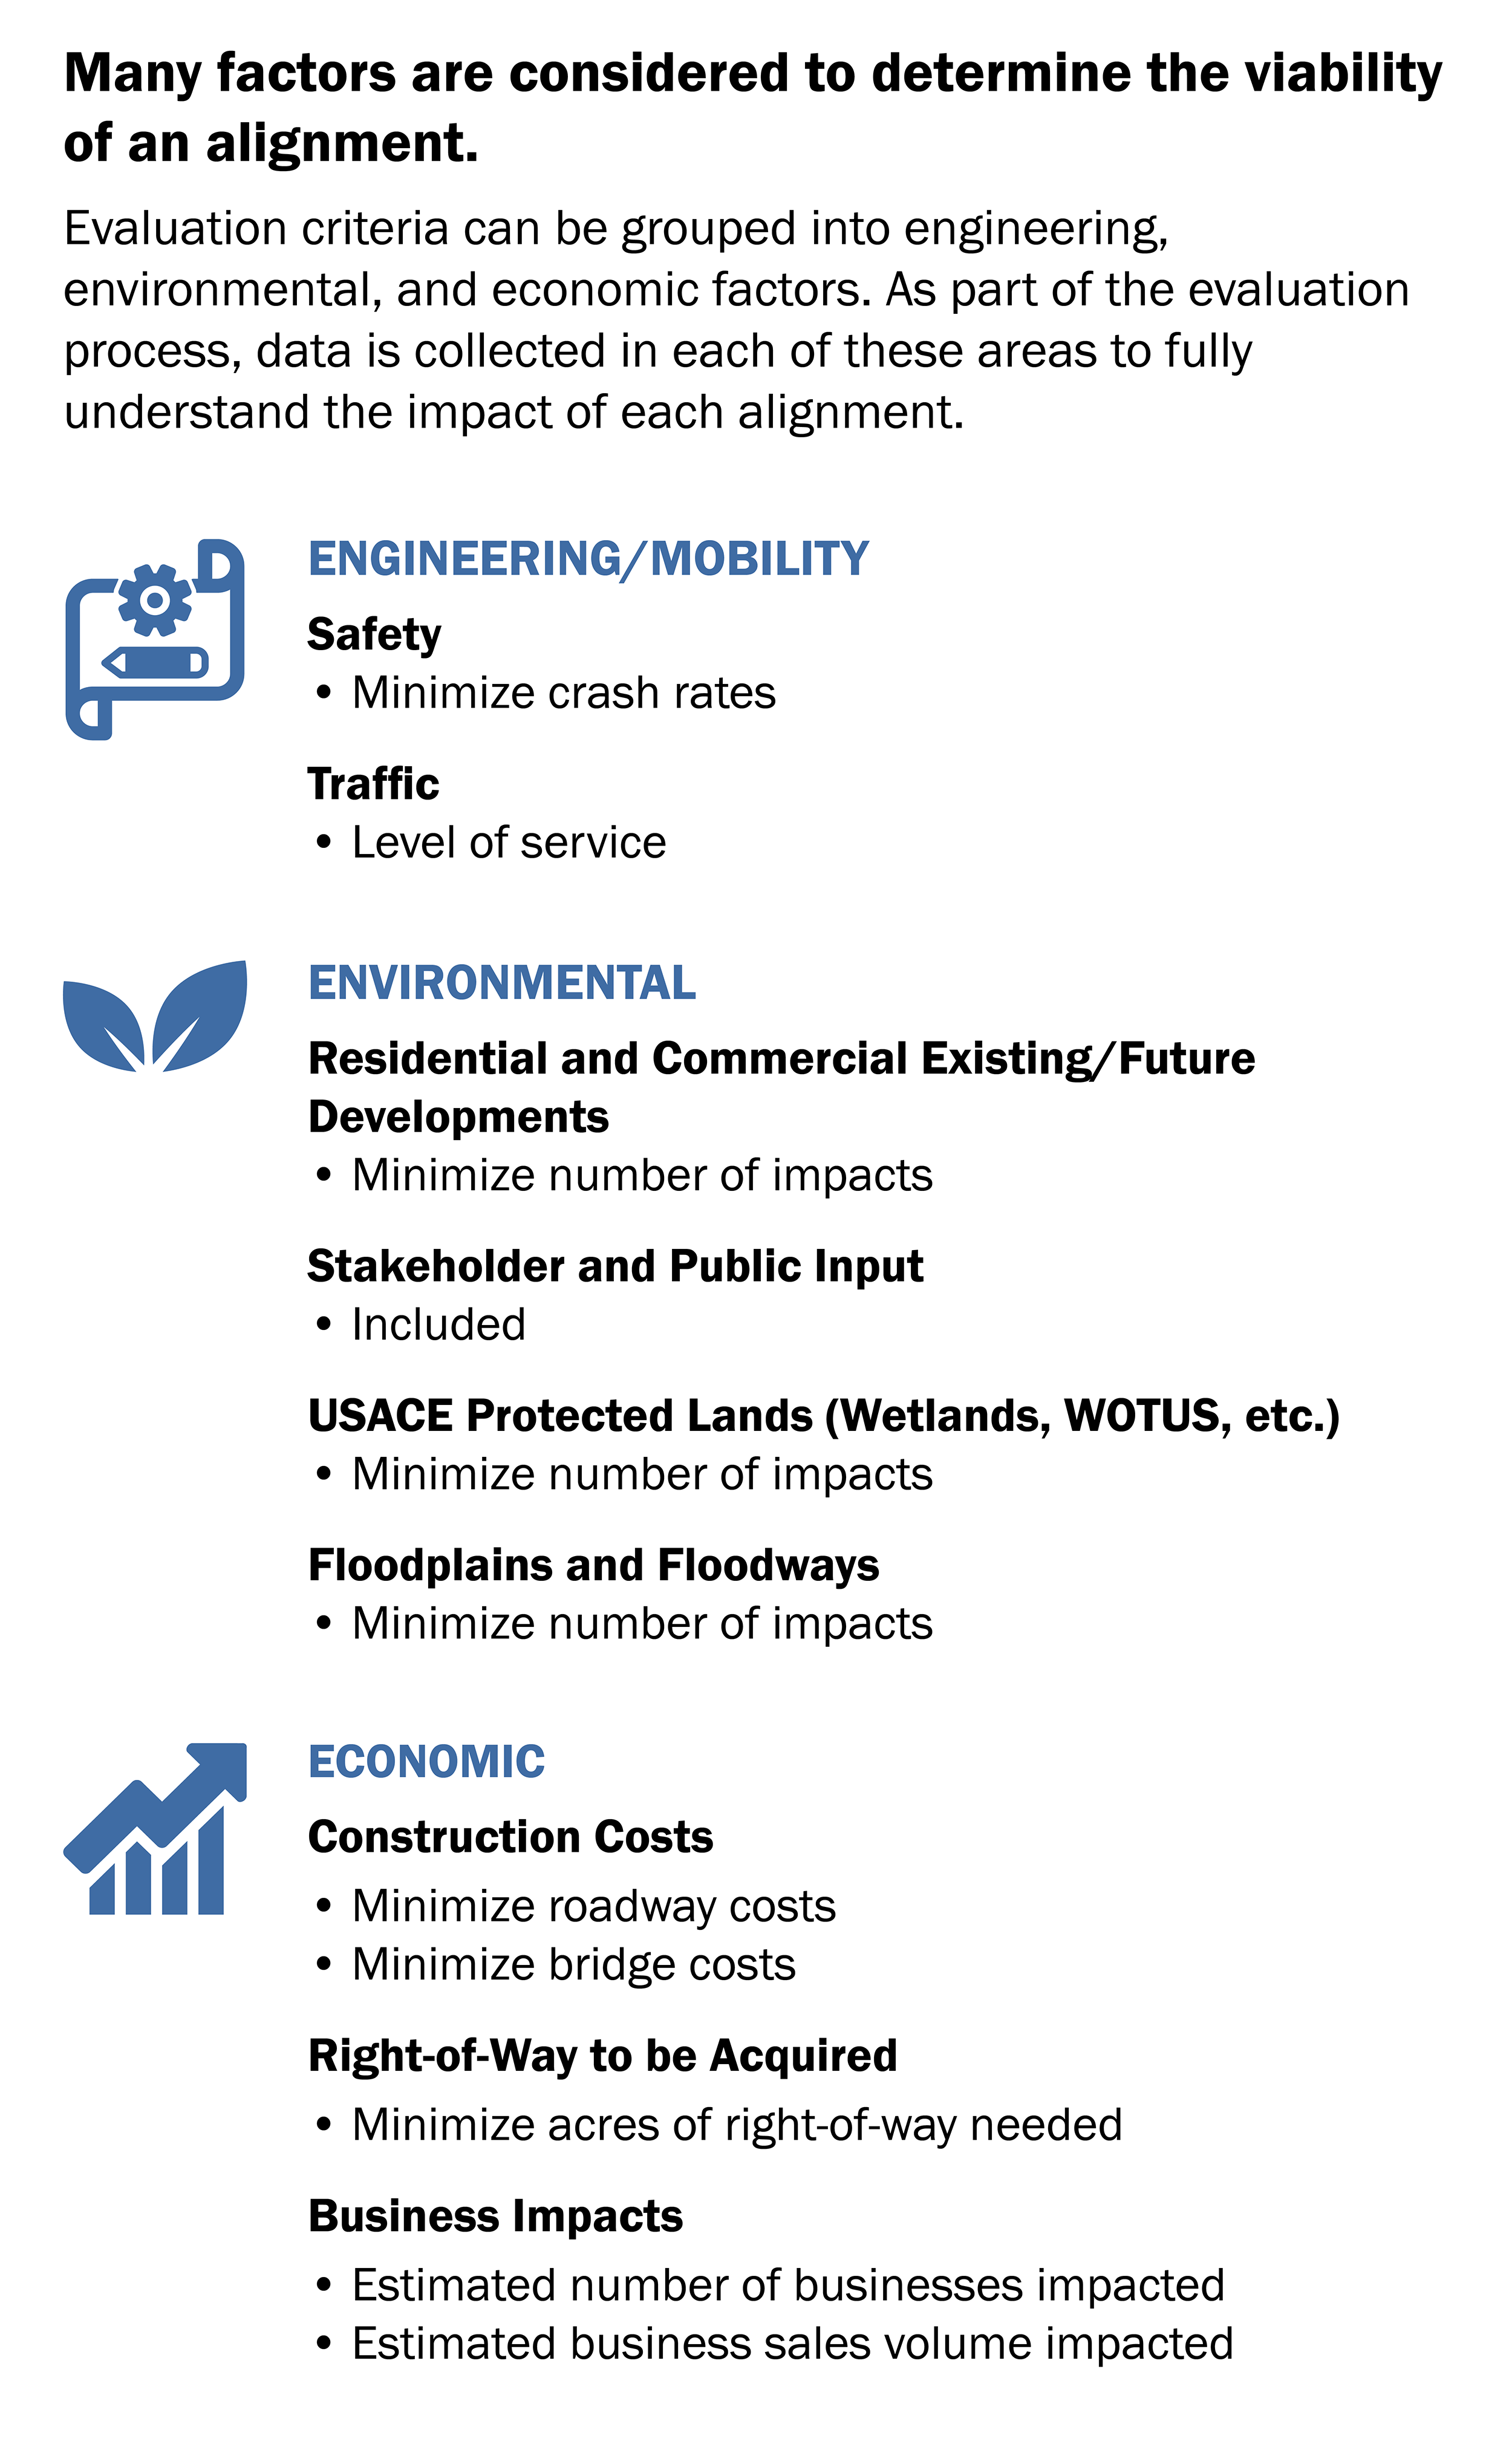 Engineering/mobility, environmental, and economic factors